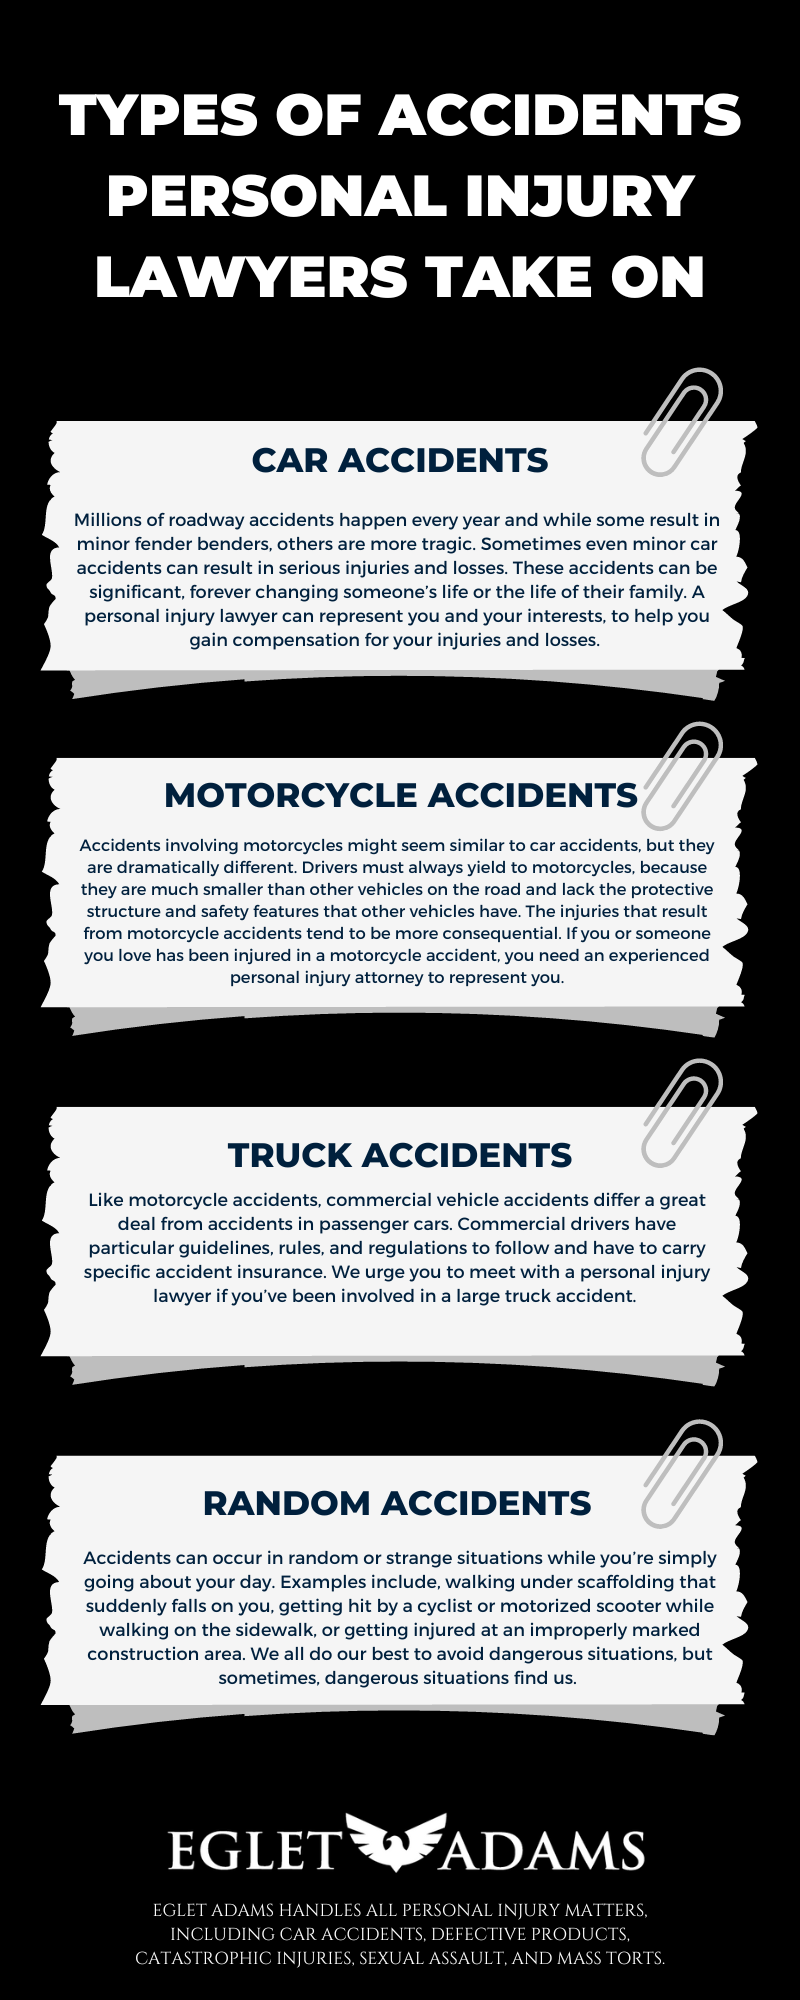 TYPES OF ACCIDENTS PERSONAL INJURY LAWYERS TAKE ON INFOGRAPHIC